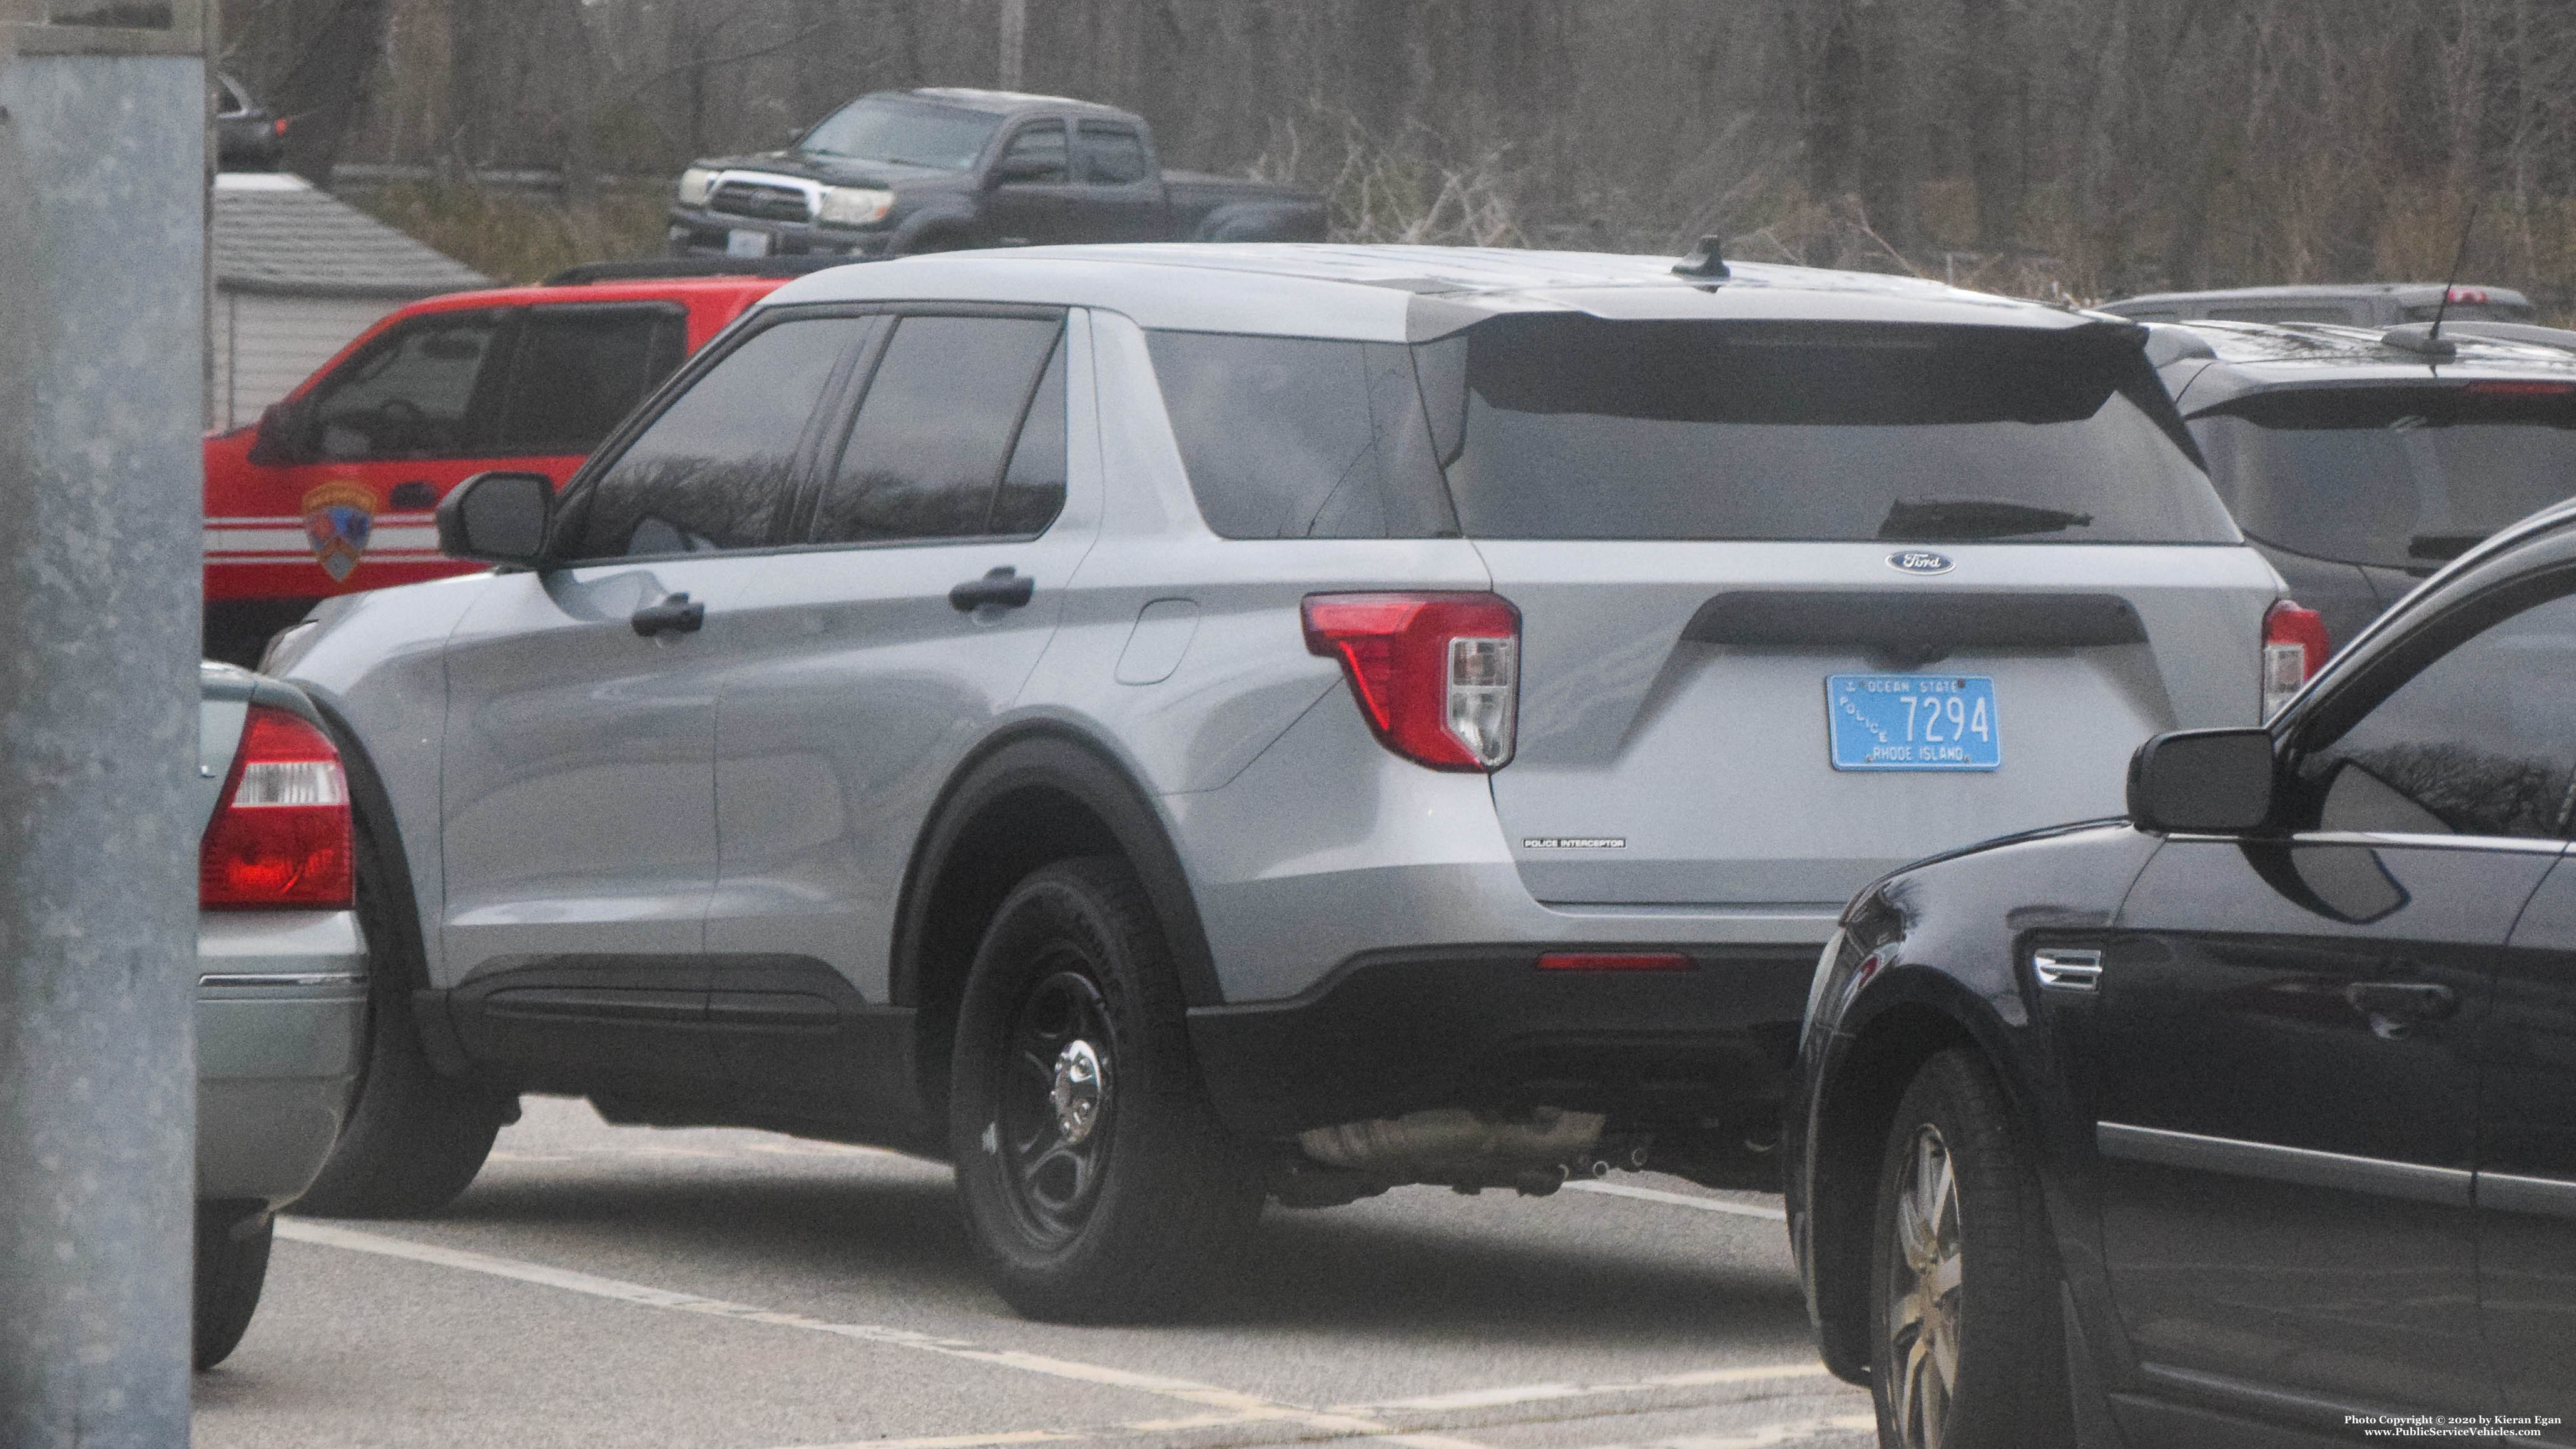 A photo  of North Kingstown Police
            Unmarked Unit, a 2020 Ford Police Interceptor Utility             taken by Kieran Egan